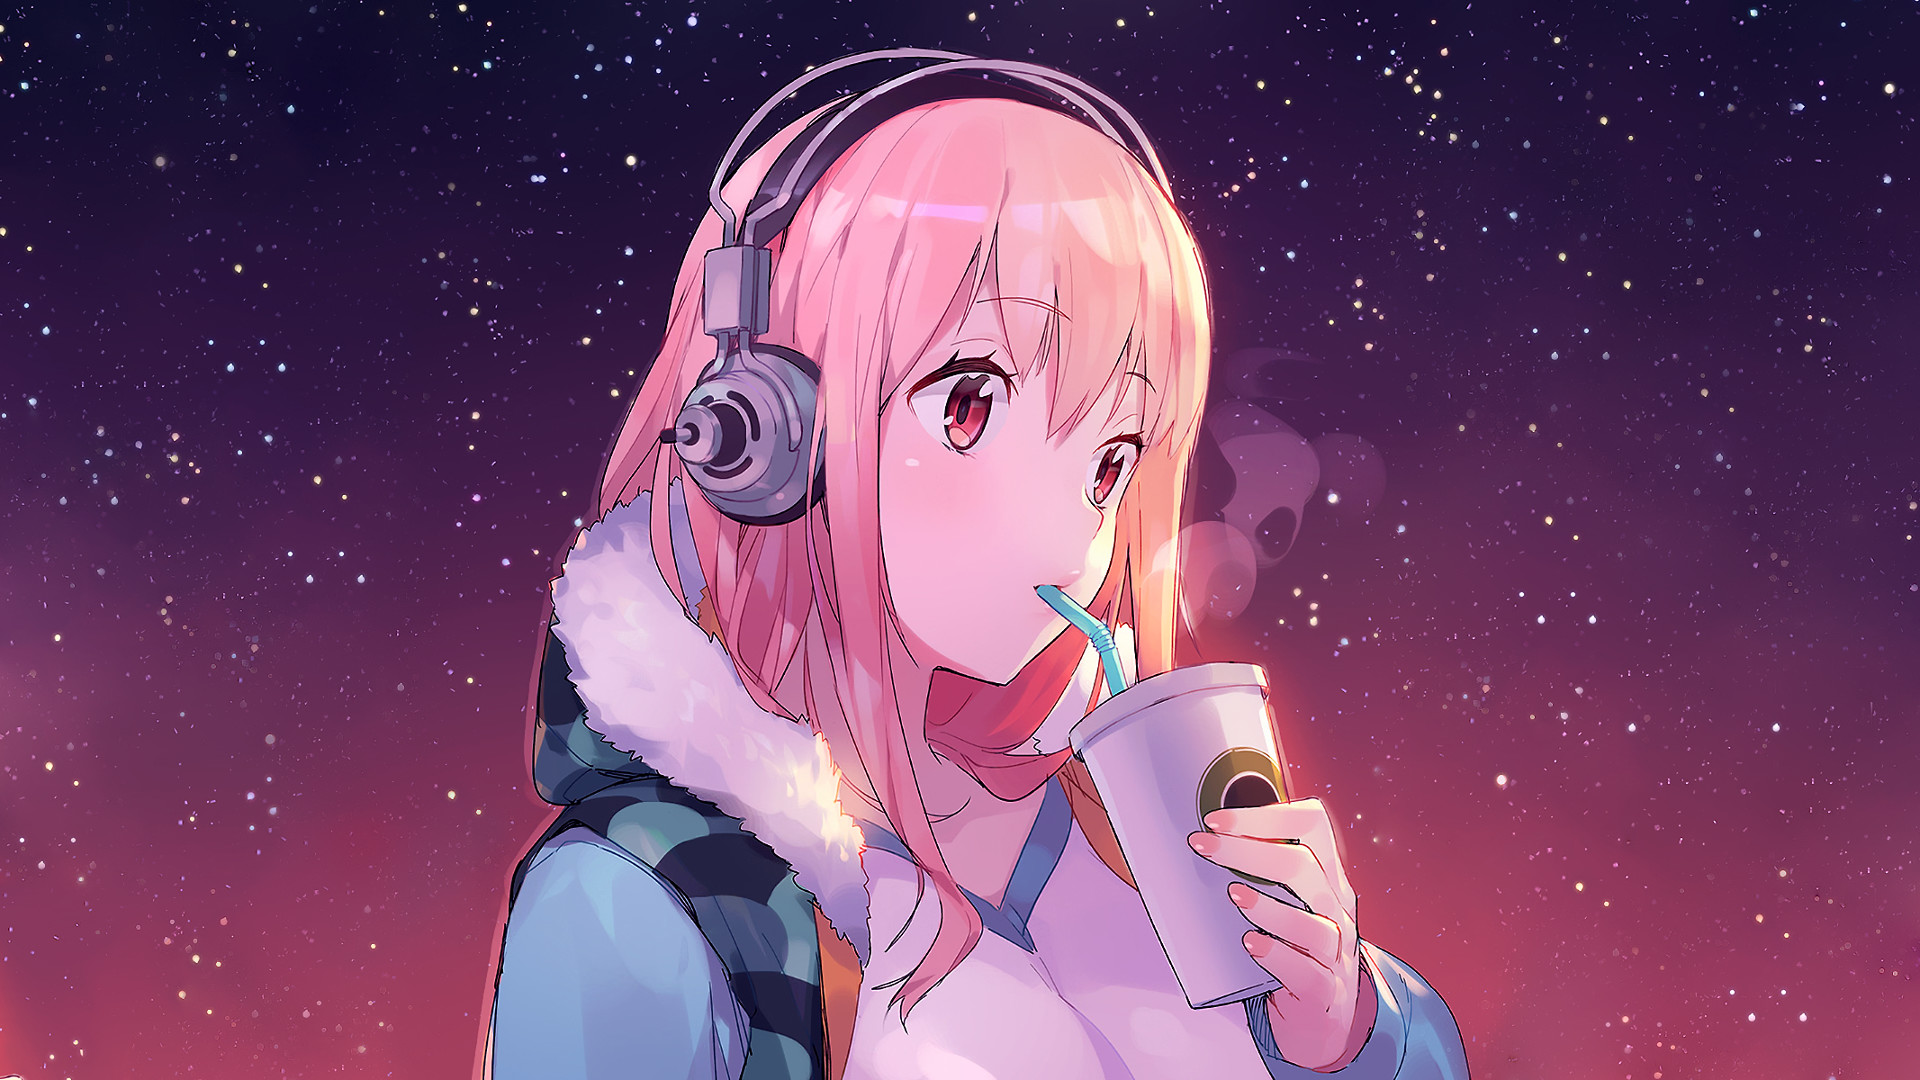 1920x1080 The girl is Super Sonico.